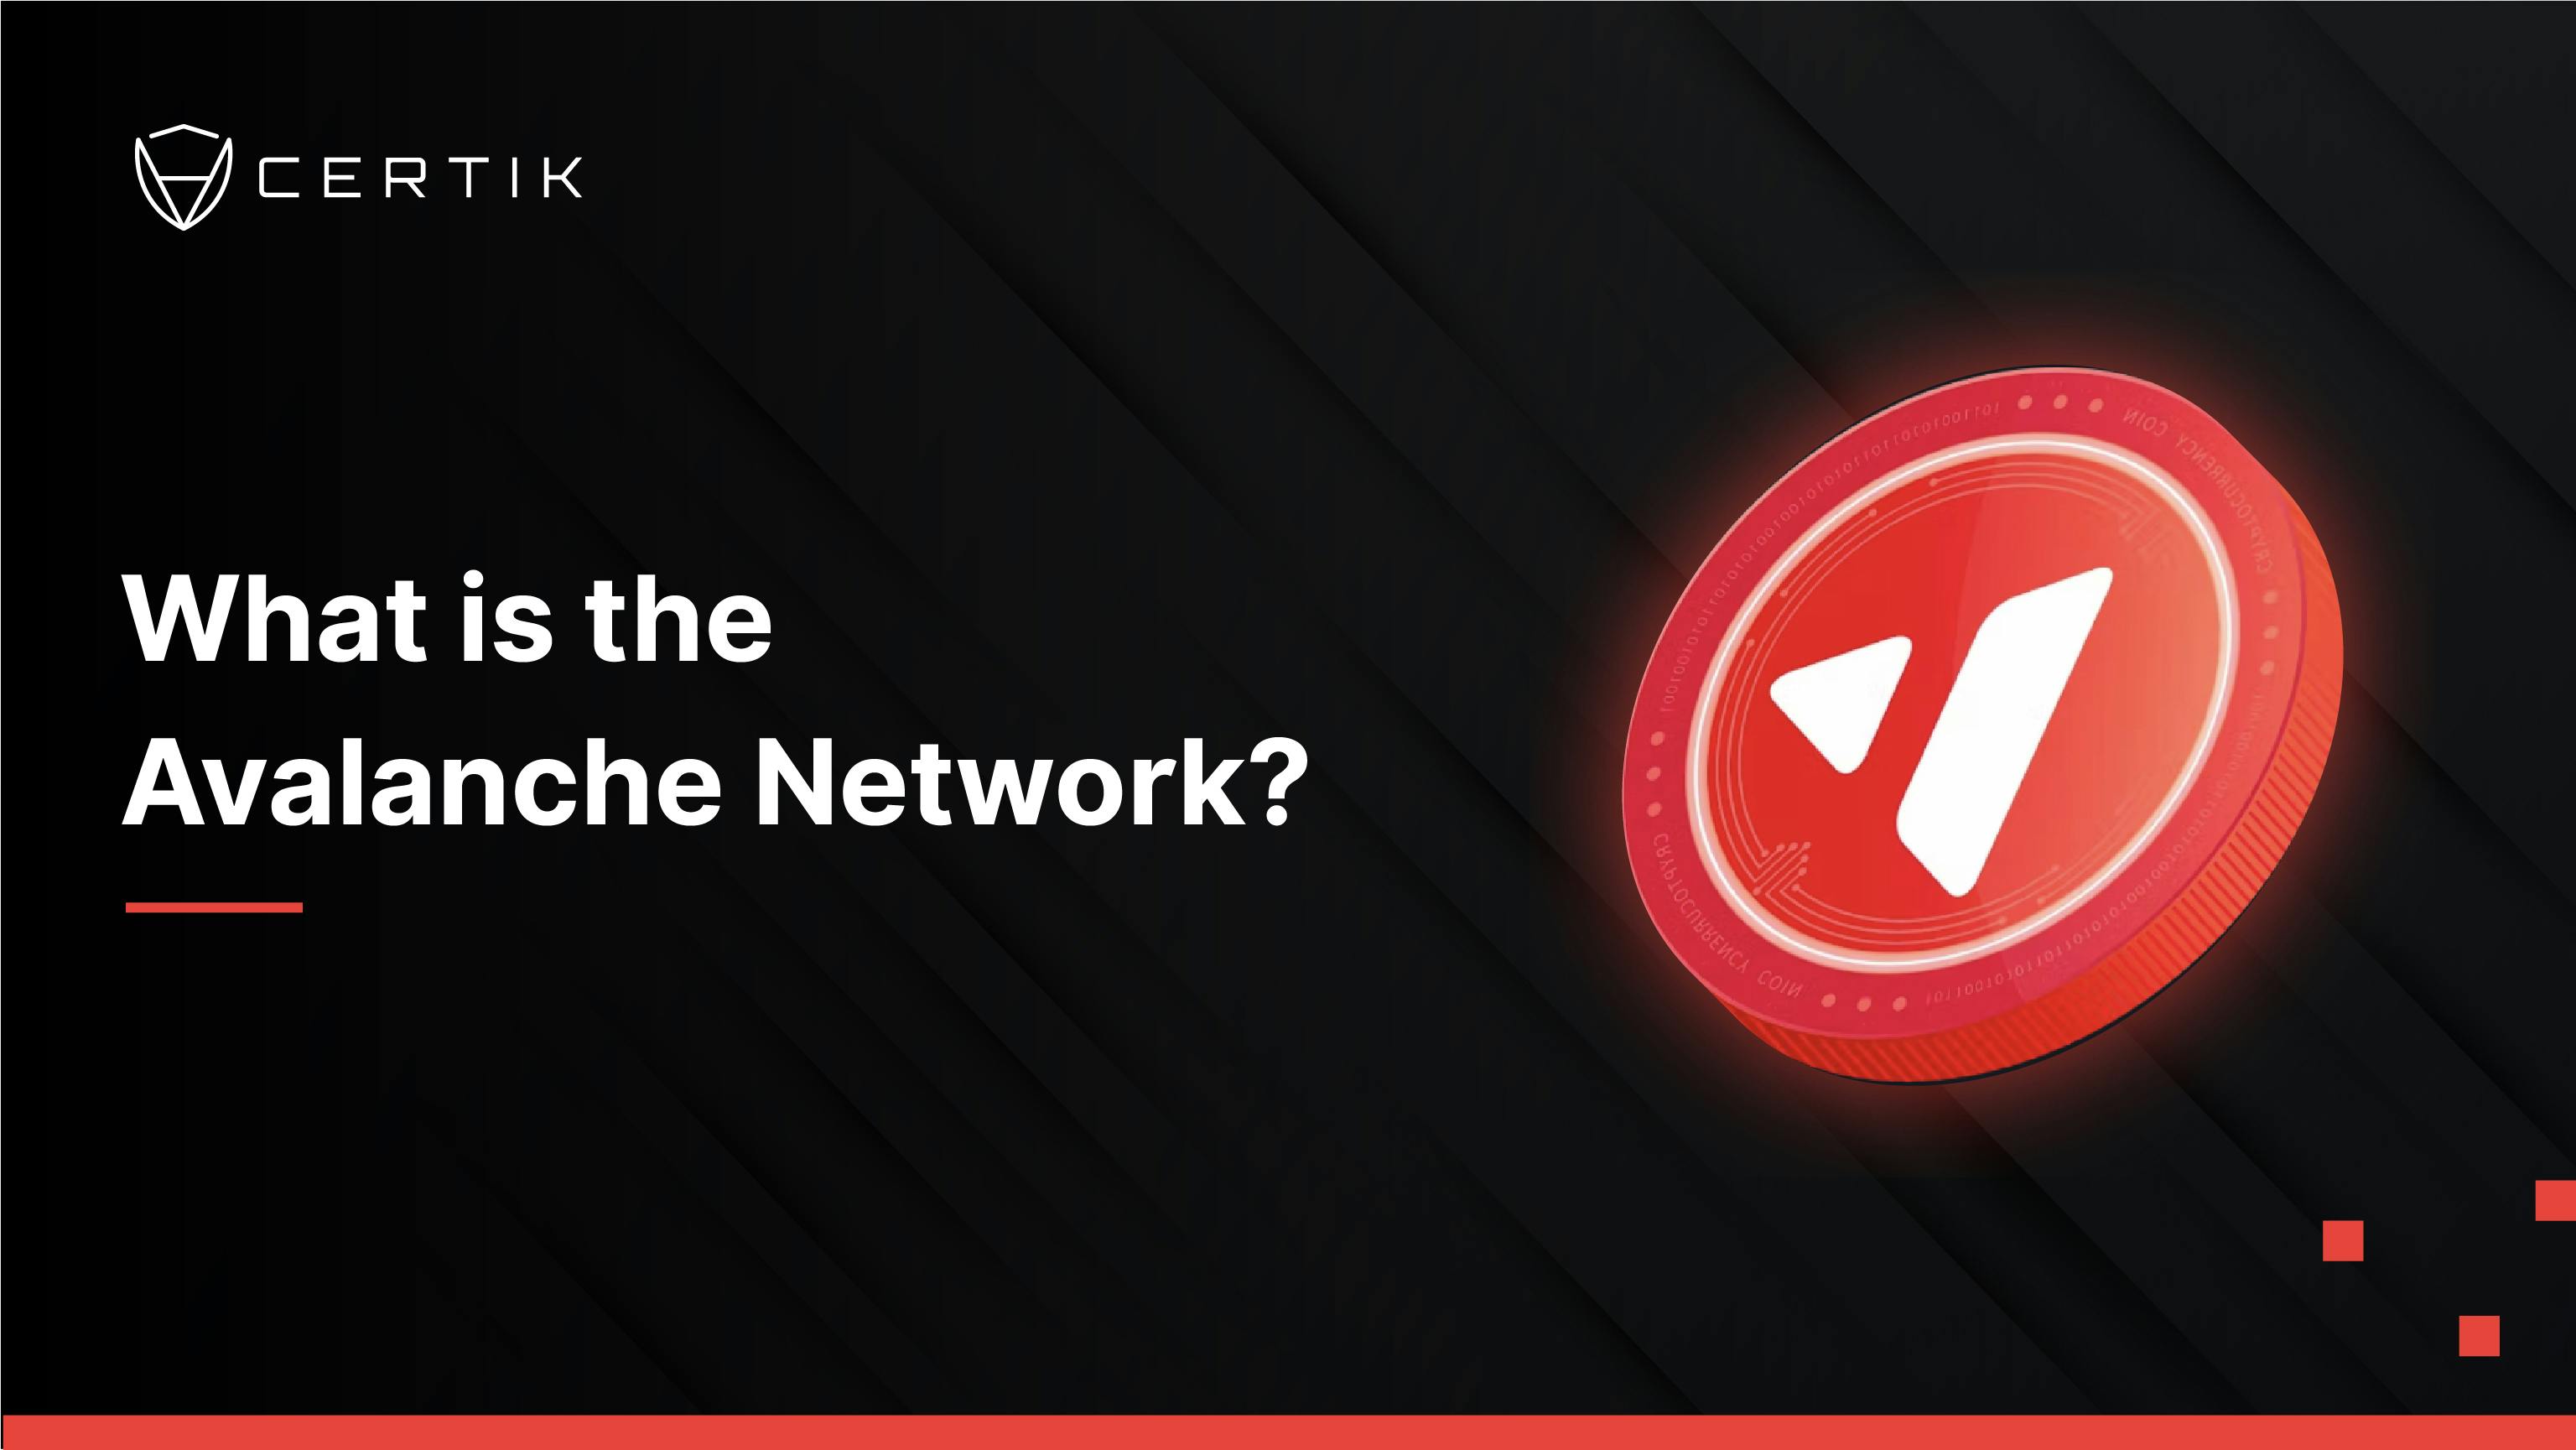 What is the Avalanche Network?